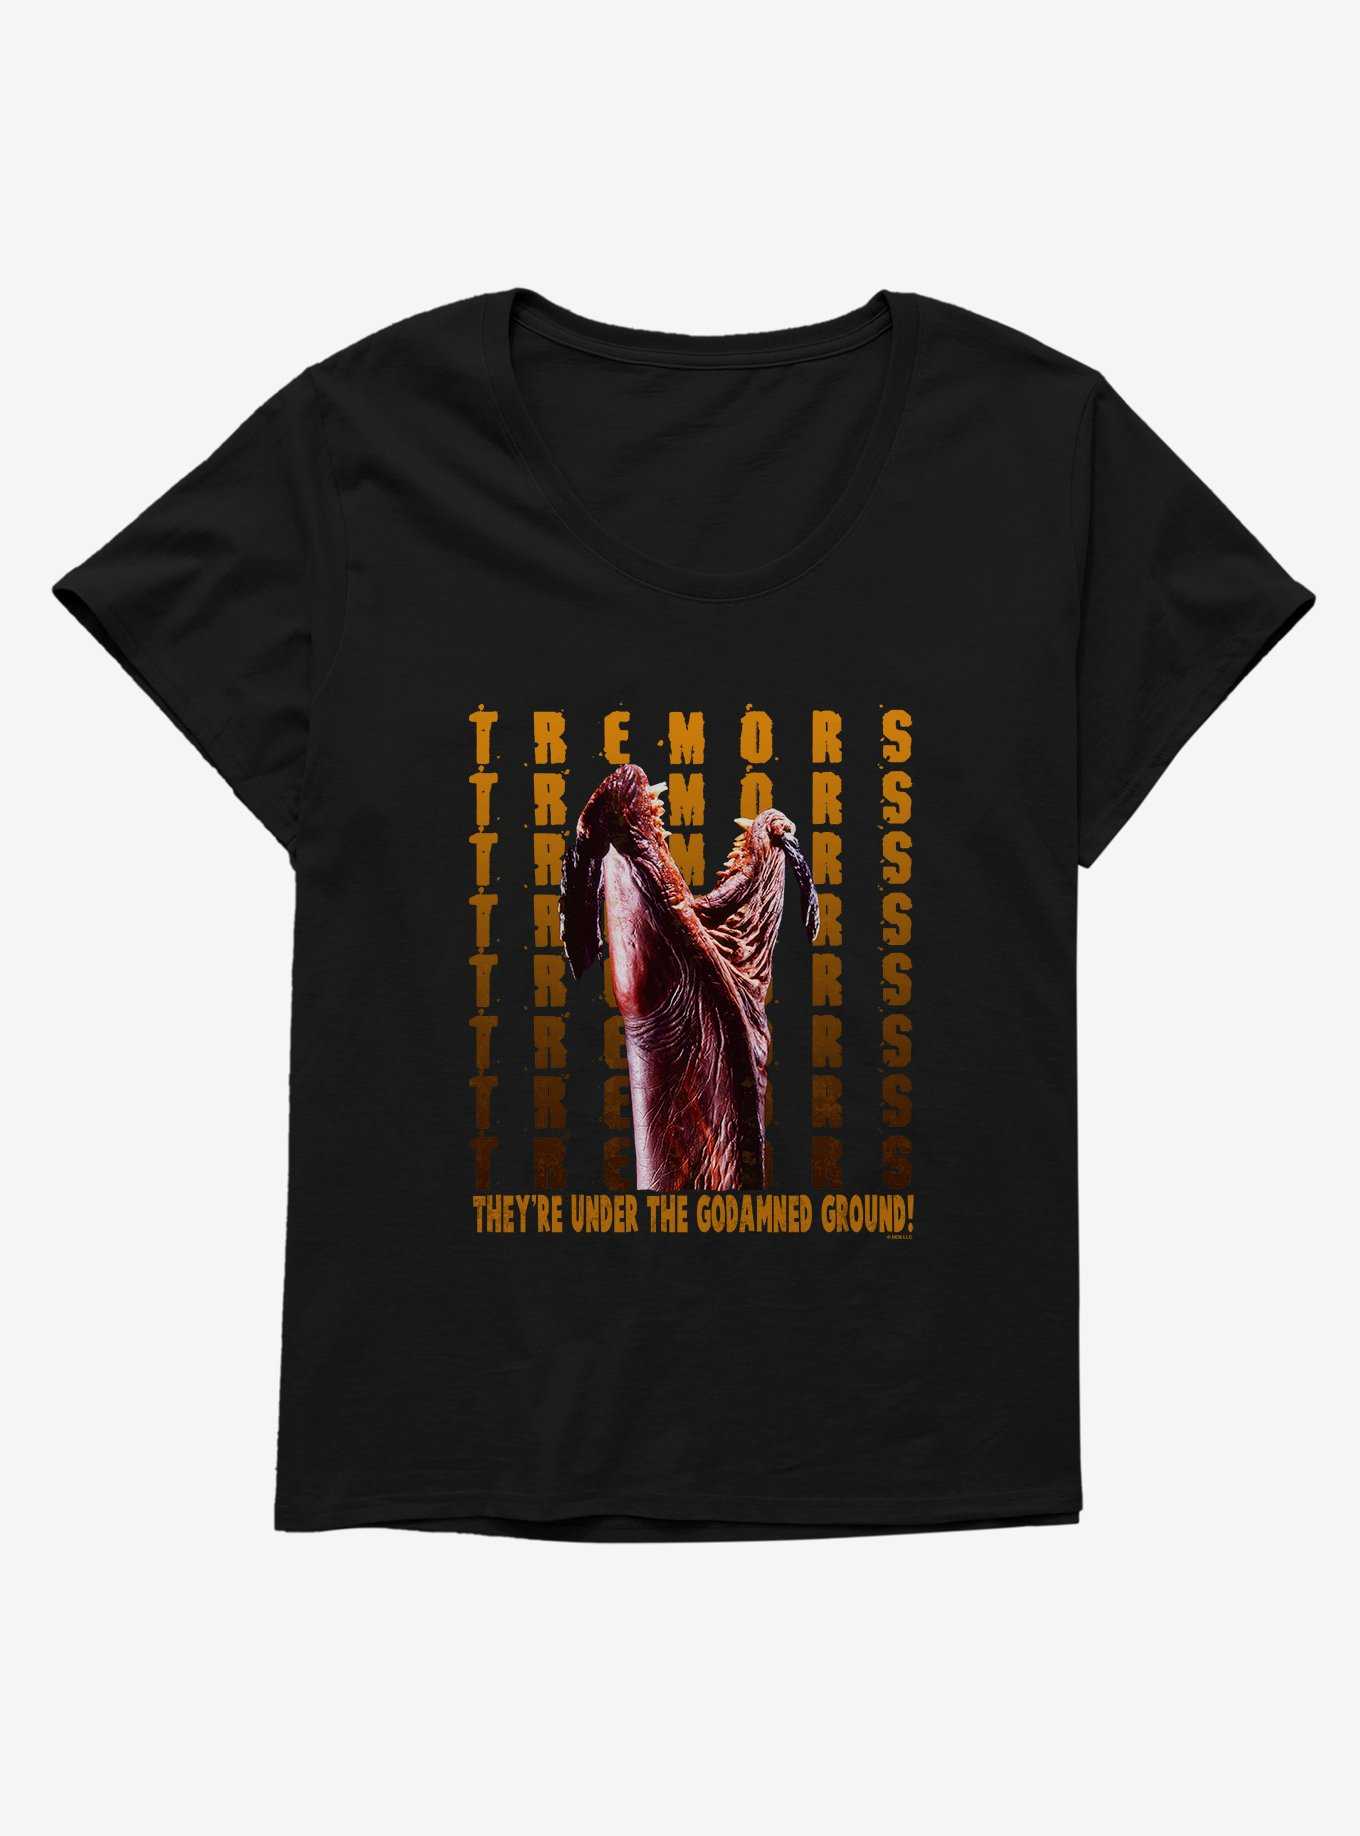 Tremors They're Under The Godamned Ground! Womens T-Shirt Plus Size, , hi-res